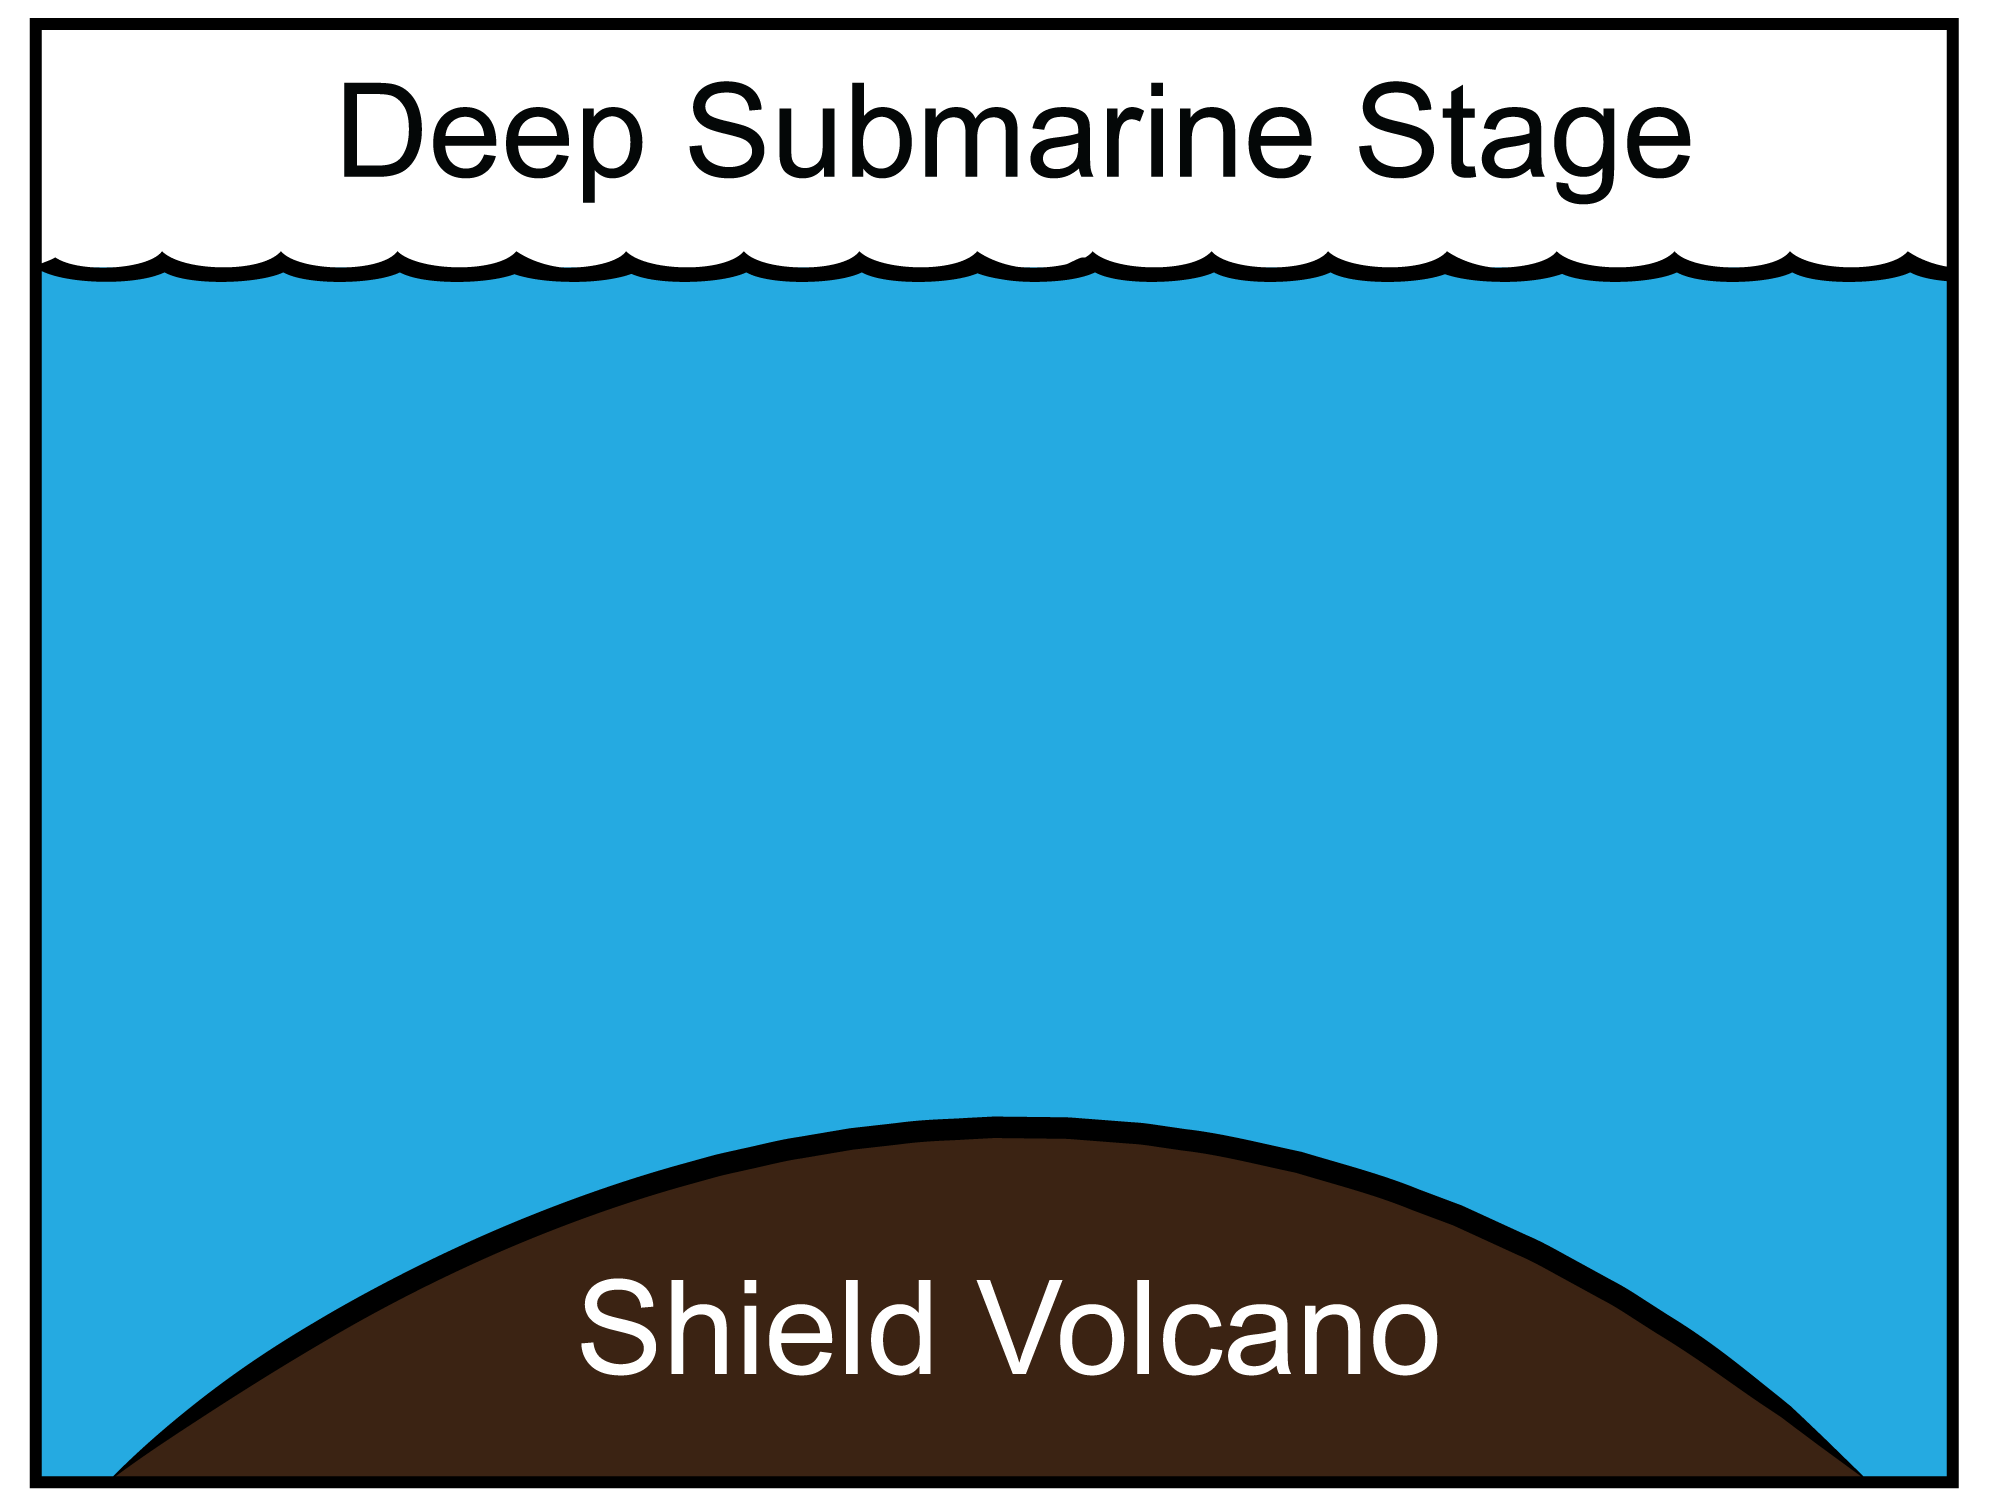 Diagram of the deep submarine stage of volcanic island formation. In this stage, a low shield voclano has formed under the ocean and remains deep underwater.